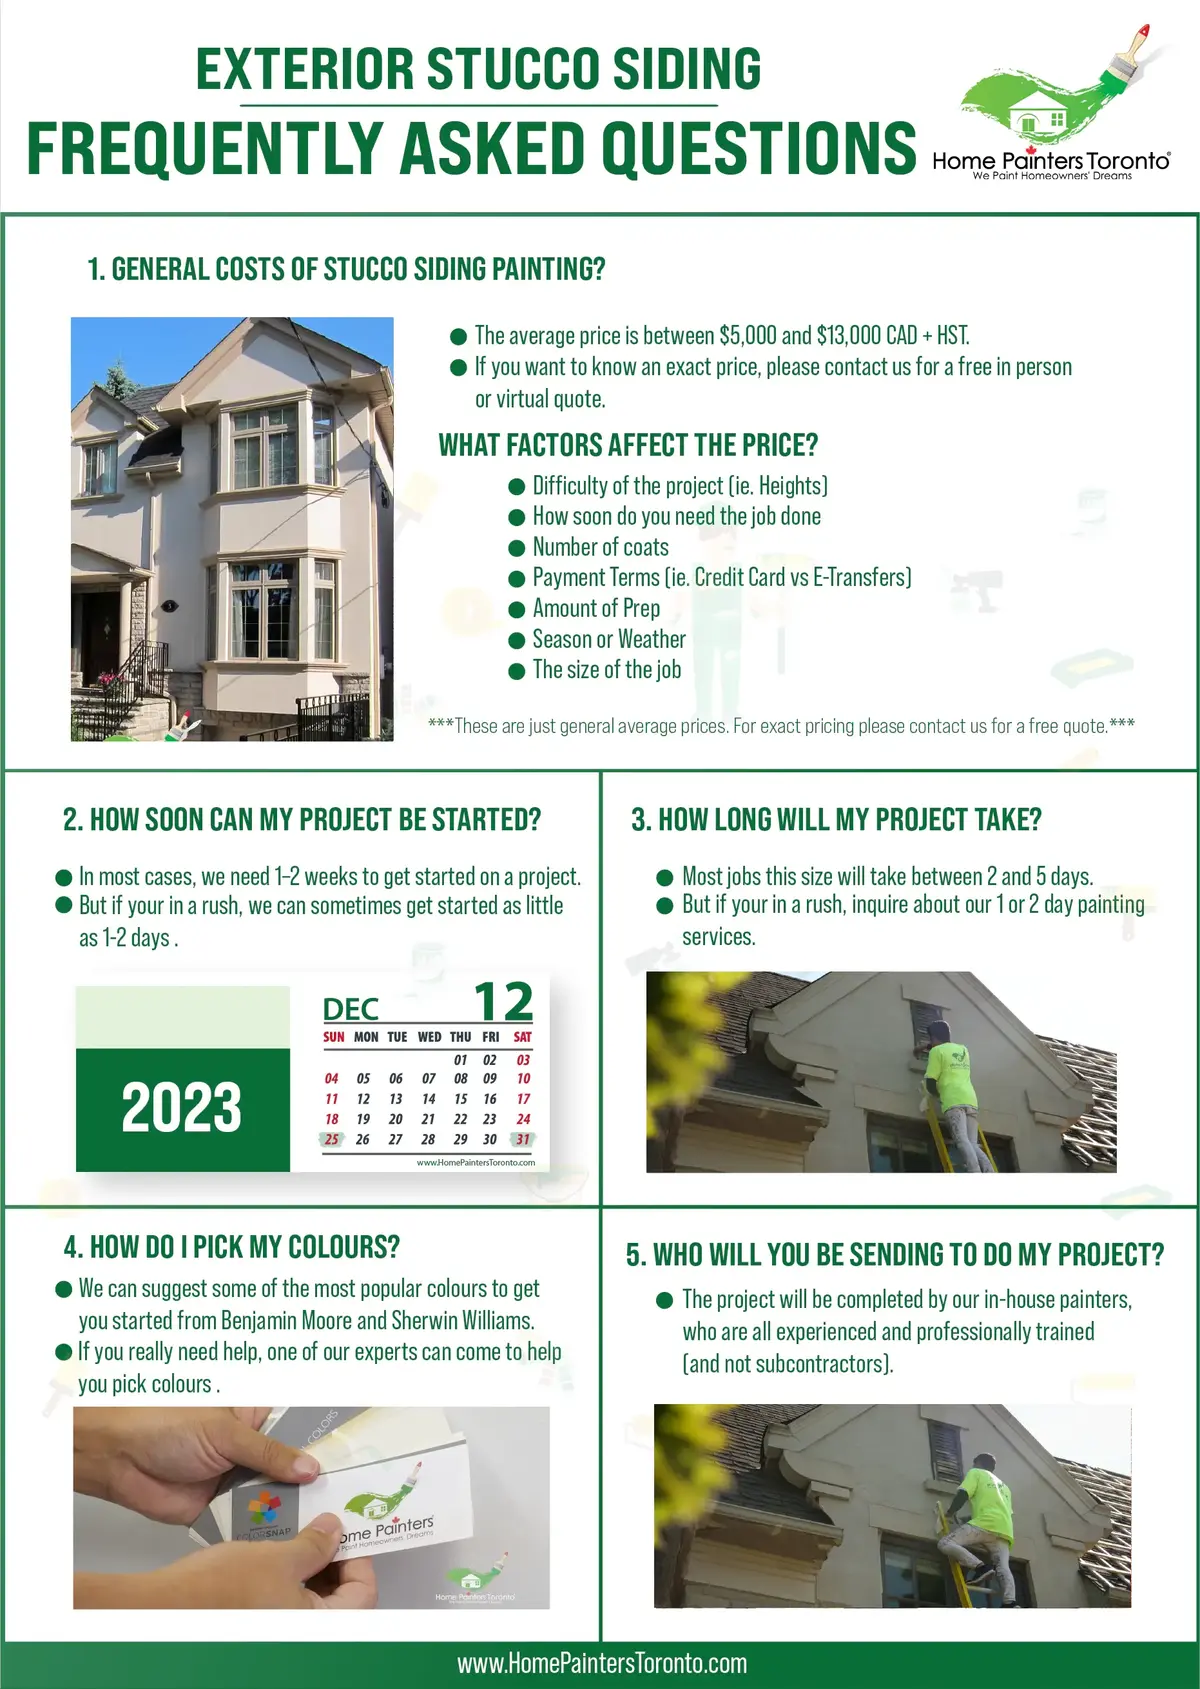 Infographic of frequently asked questions about exterior stucco siding